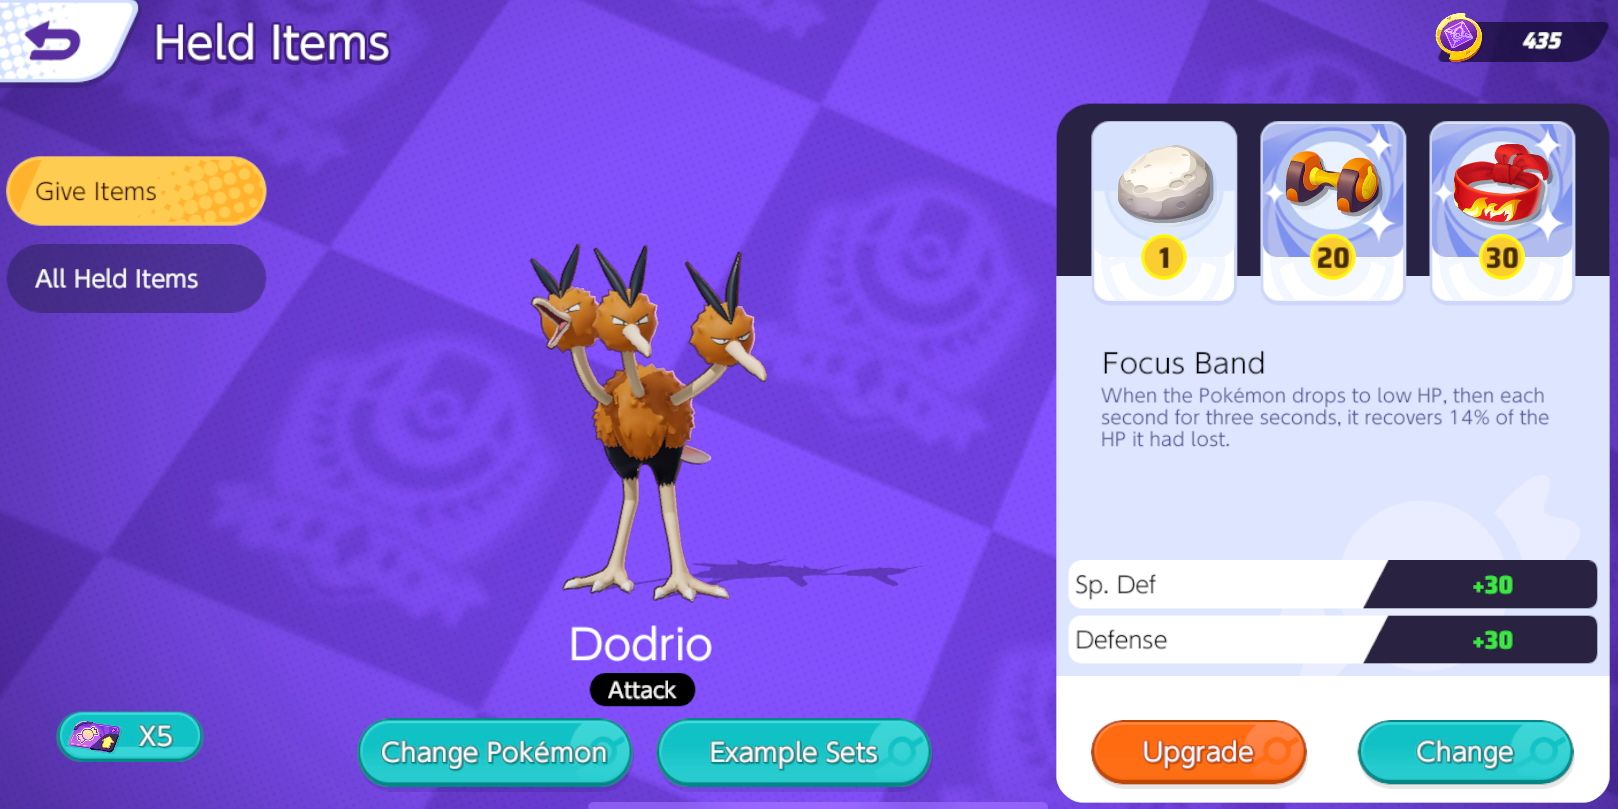 Dodrio's Held Item selection screen with Float Stone, Attack Weight, and Focus Band selected